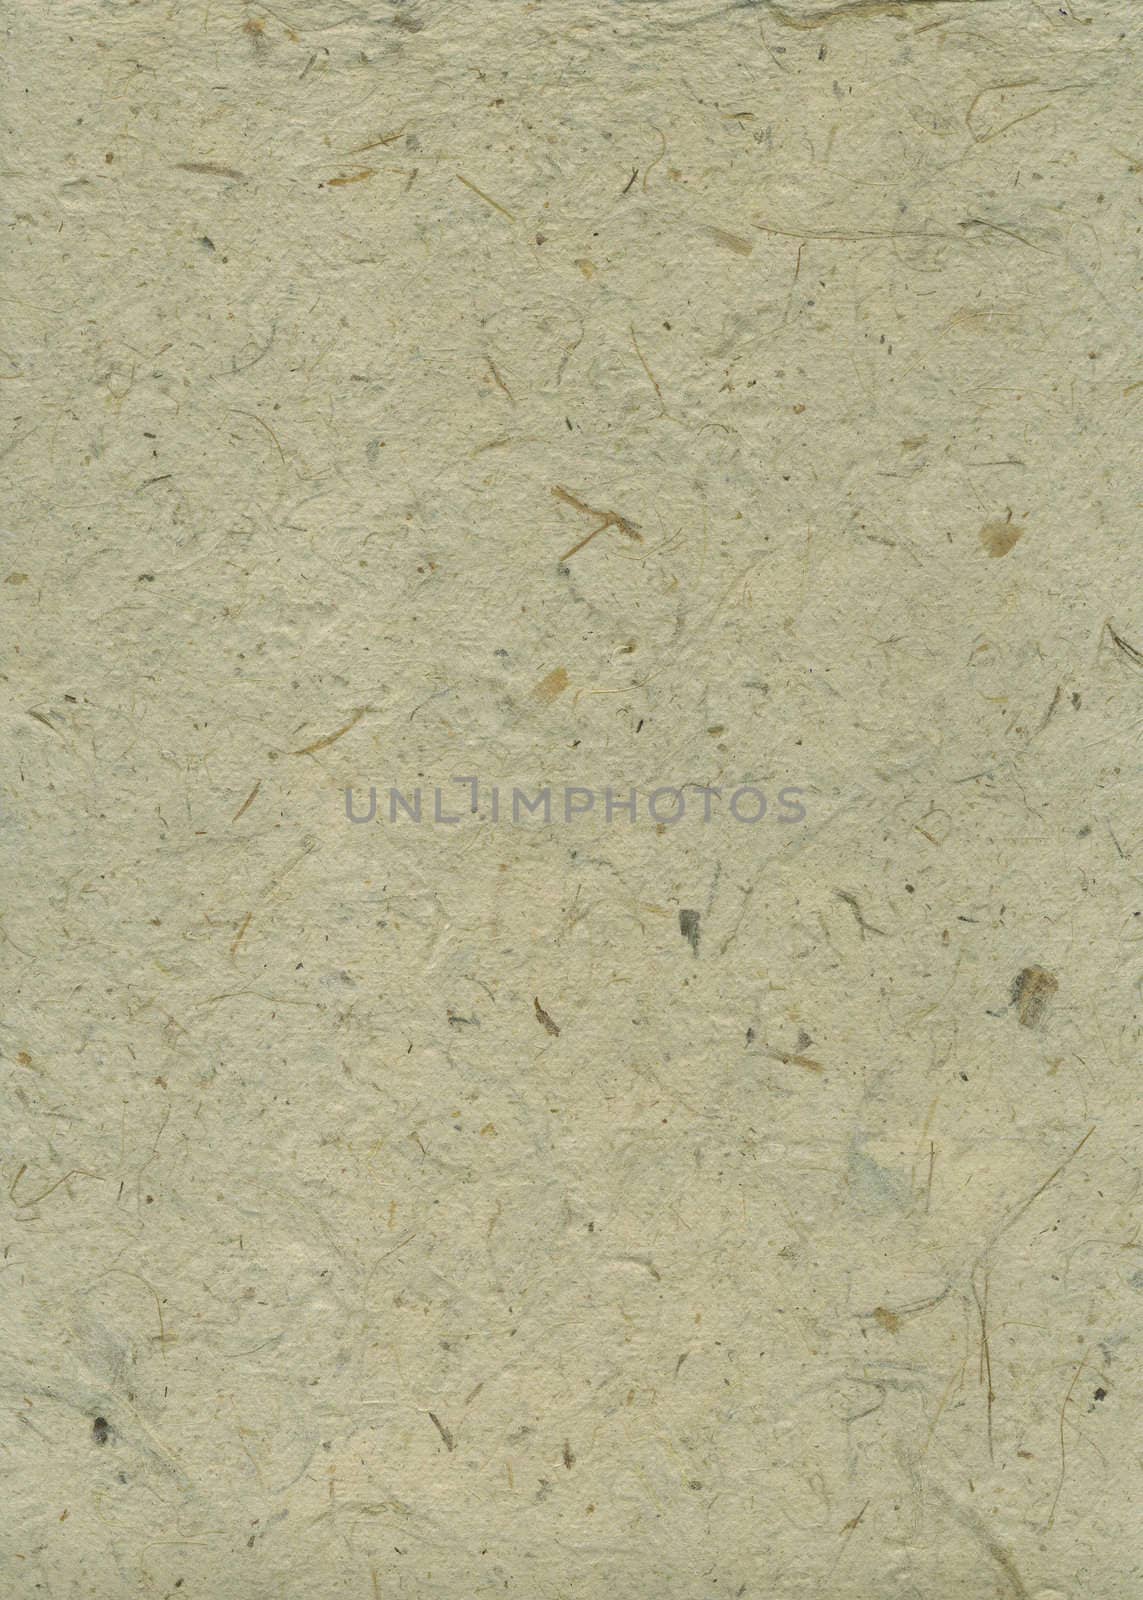 Detail of the surface of the handmade paper with remains of plants - natural product